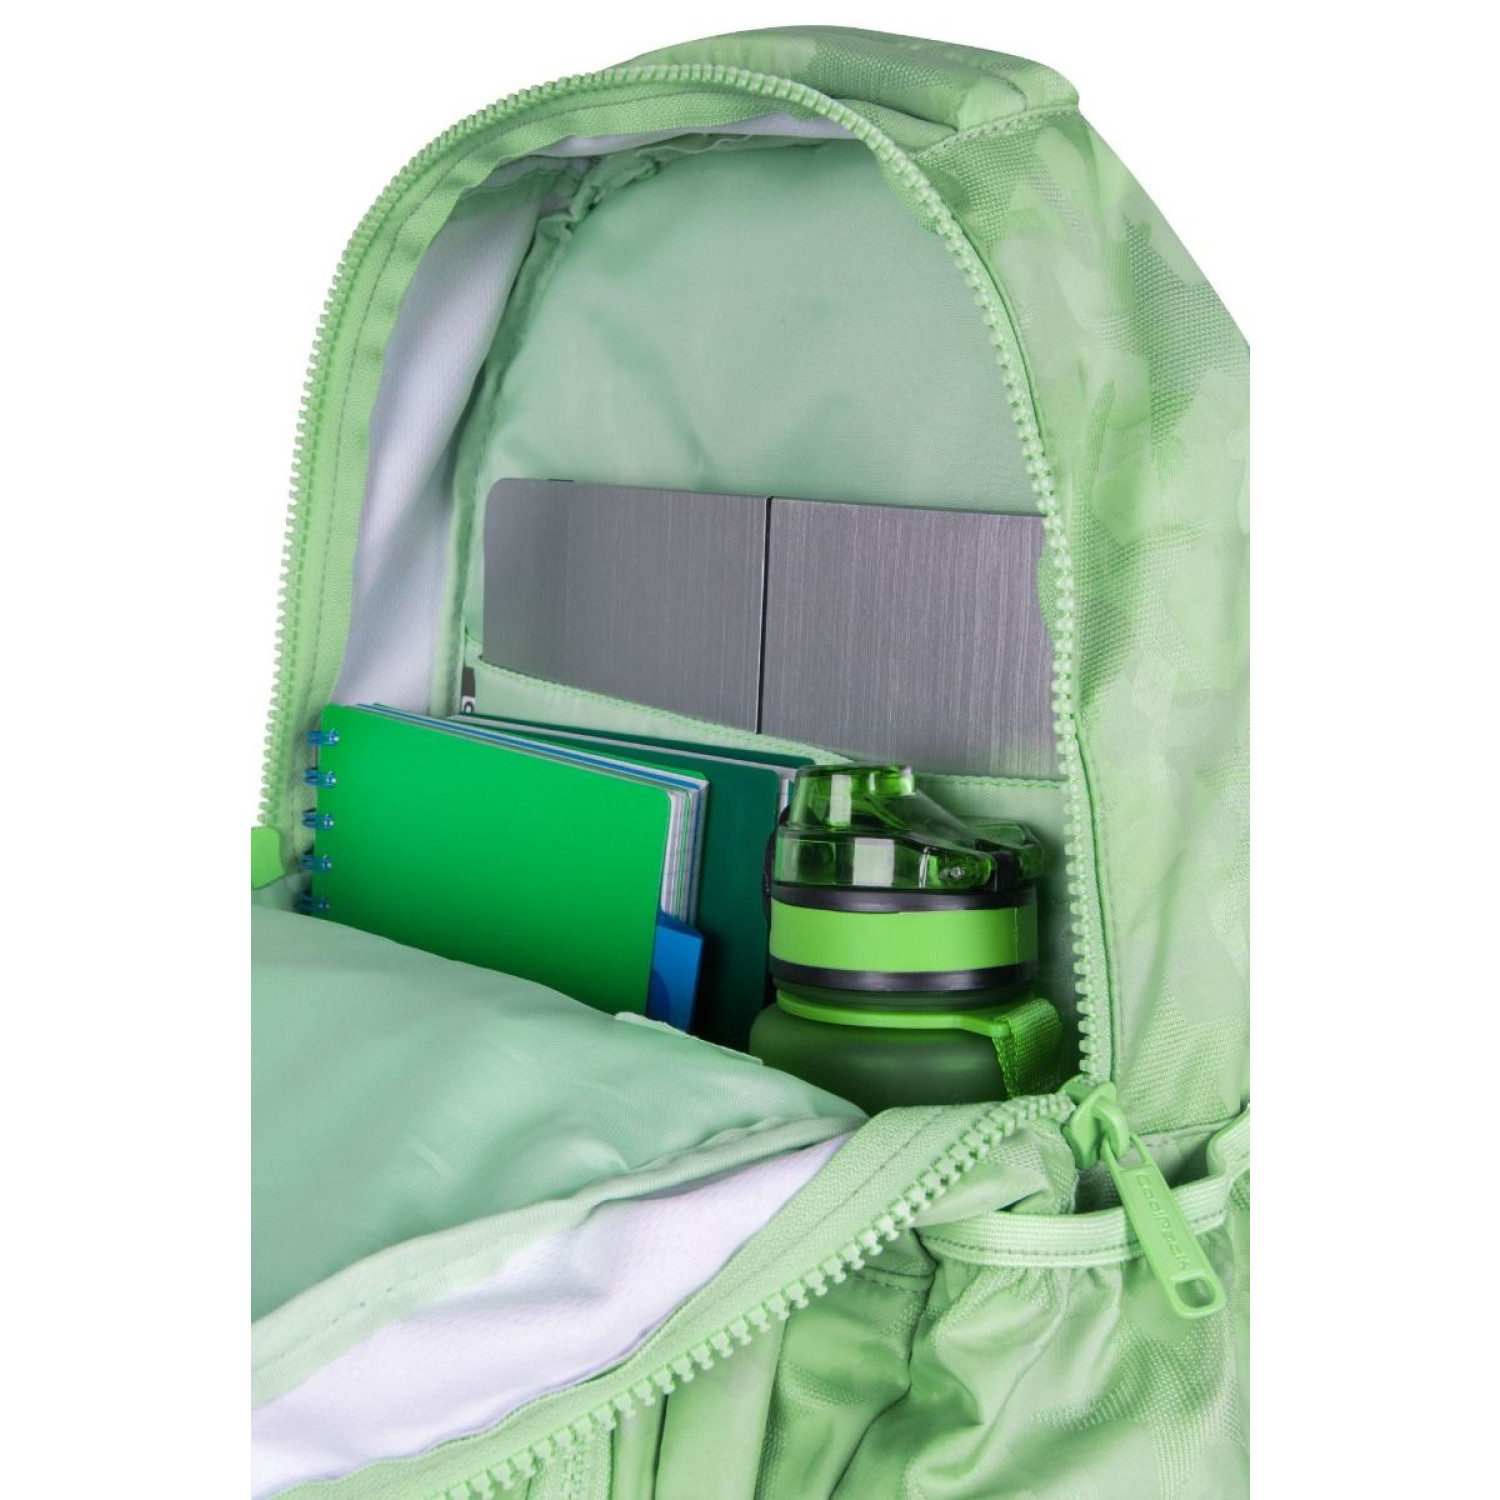 Раница Coolpack Pick Green